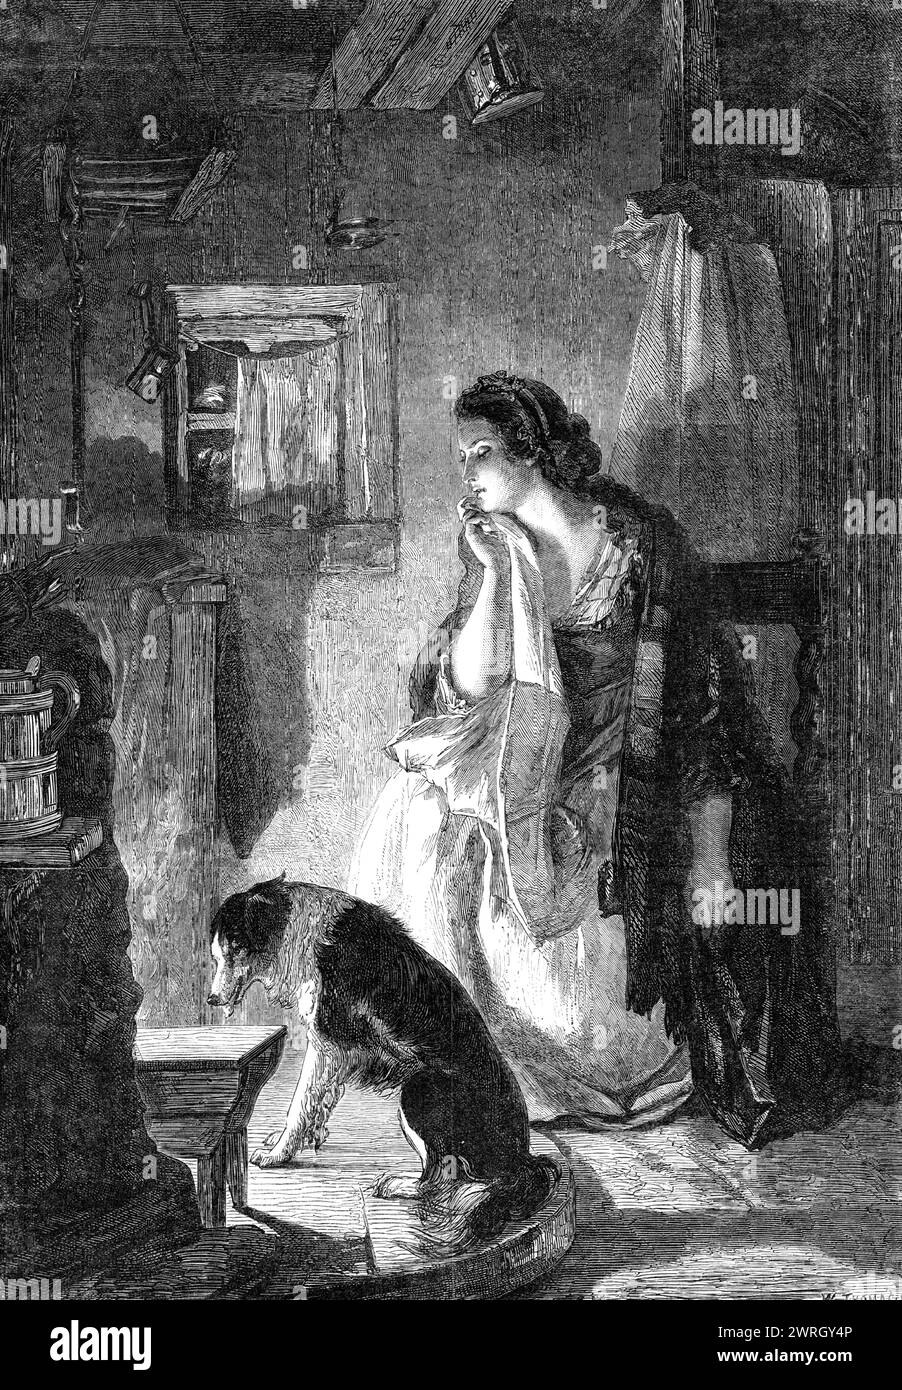 &quot;The Waefu' Heart&quot;, by T. Duncan, A.R.A., in the gallery of the South Kensington Museum, 1864. Engraving of a painting '...from the Sheepshanks' Collection of the South Kensington Museum [depicting] the Waefu' Wife sitting in the &quot;ingle nook&quot; before the fire in deep despondency, with a shepherd's collie dog as the only companion of her brooding solitude...In the opinion of Sir Walter Scott and many other competent judges, there is not in the language a more perfect, tender, and pathetic ballad or tale of humble life than that of &quot;Auld Robin Gray,&quot; which has suppli Stock Photo